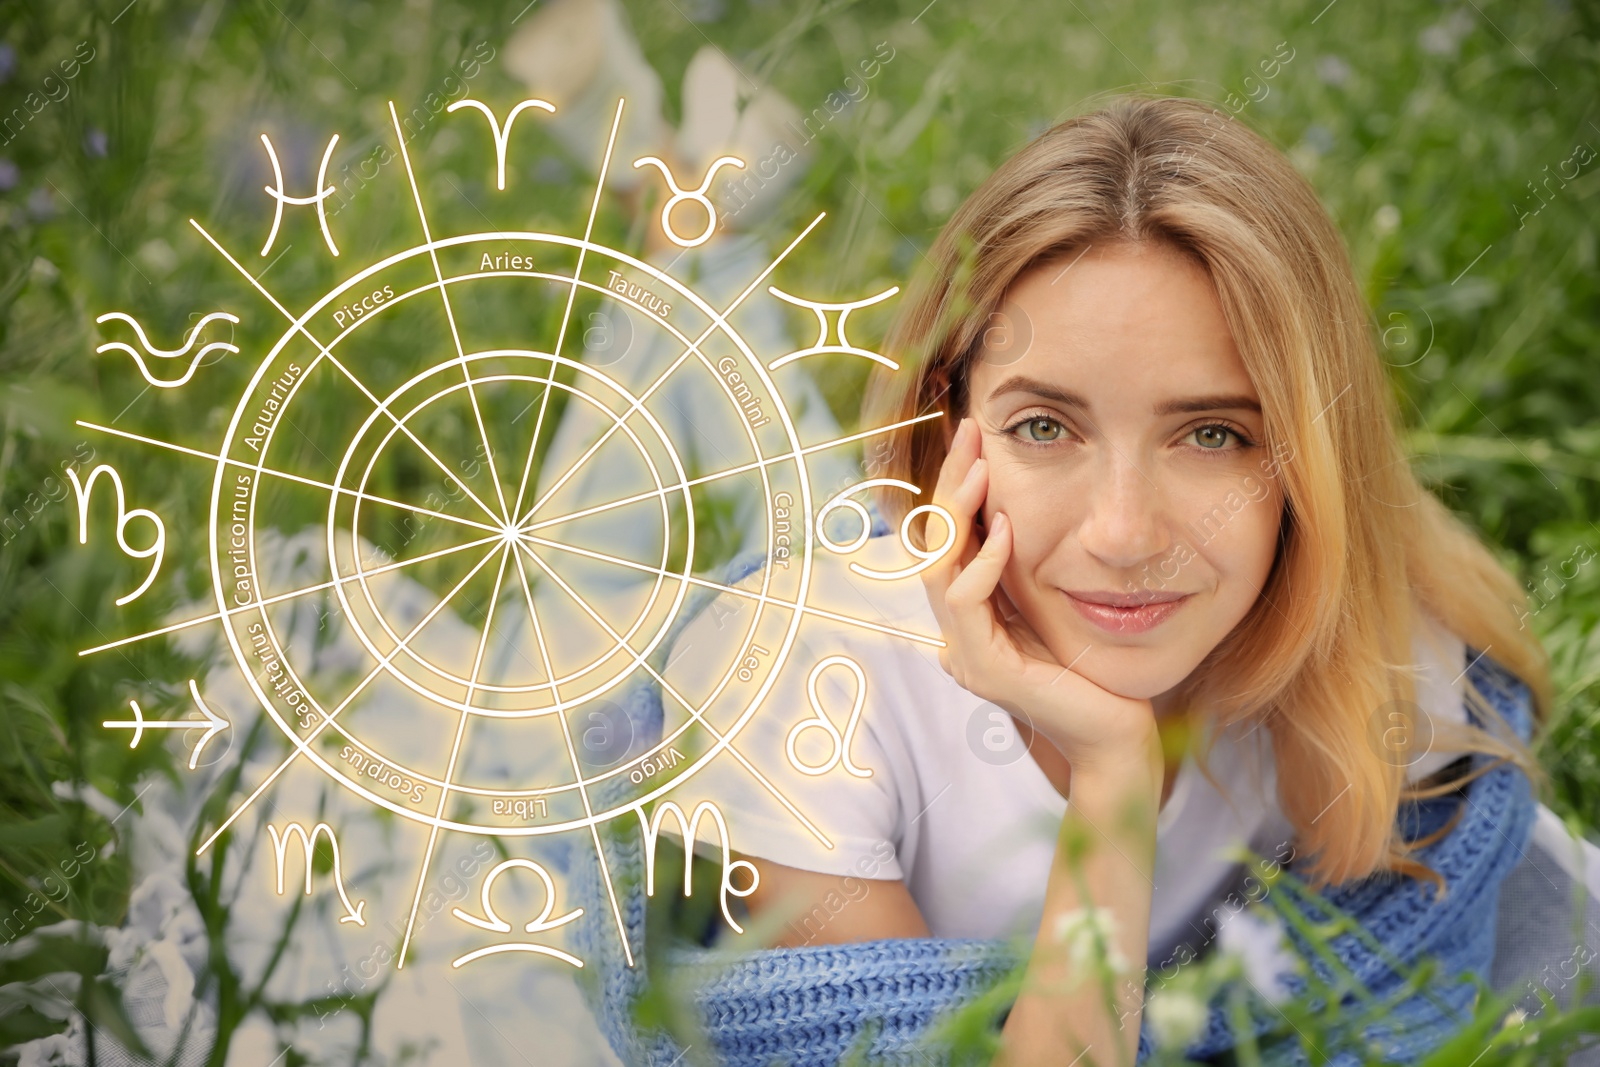 Image of Beautiful young woman outdoors and illustration of zodiac wheel with astrological signs